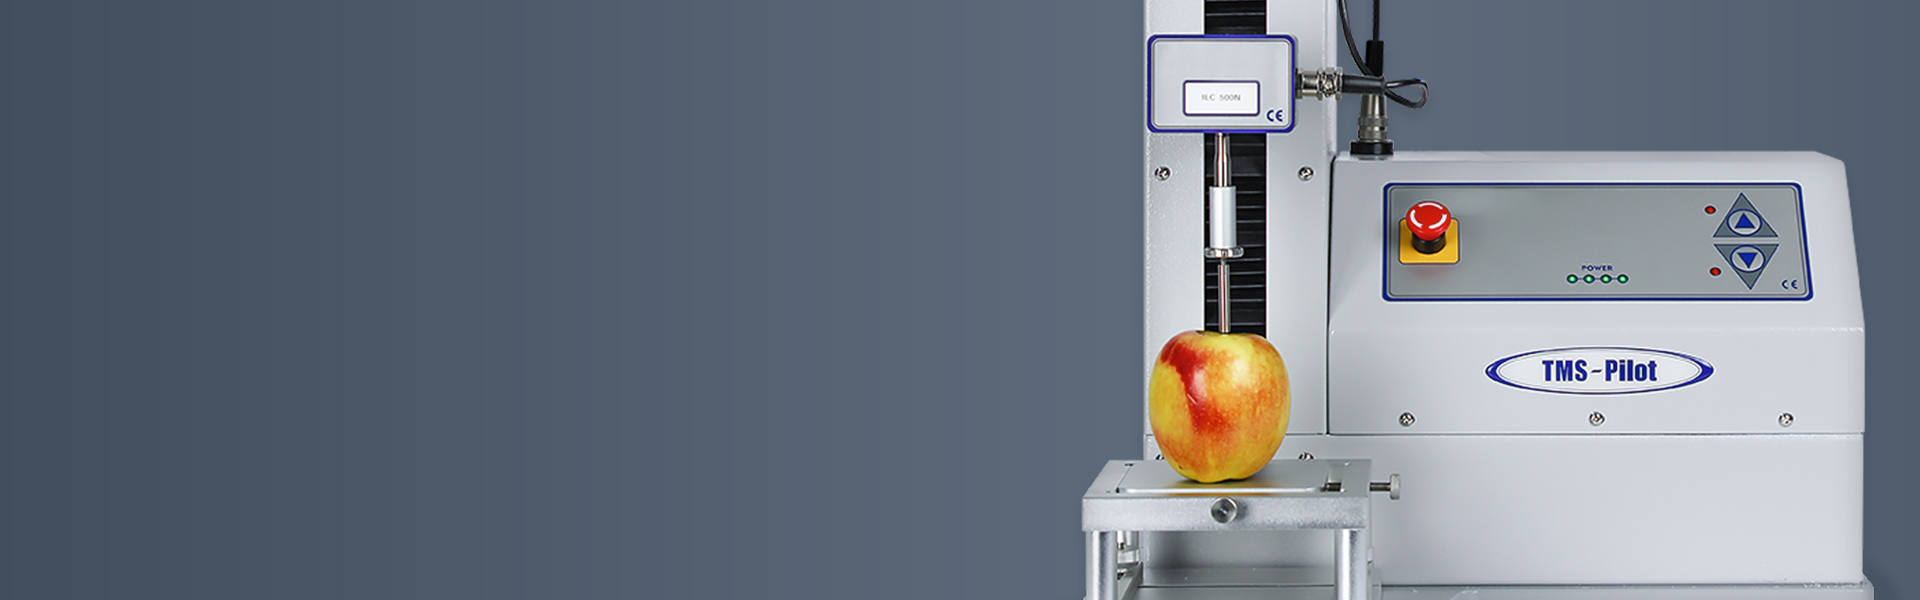 How does a texture analyzer work? Texture measurement system testing apple texture